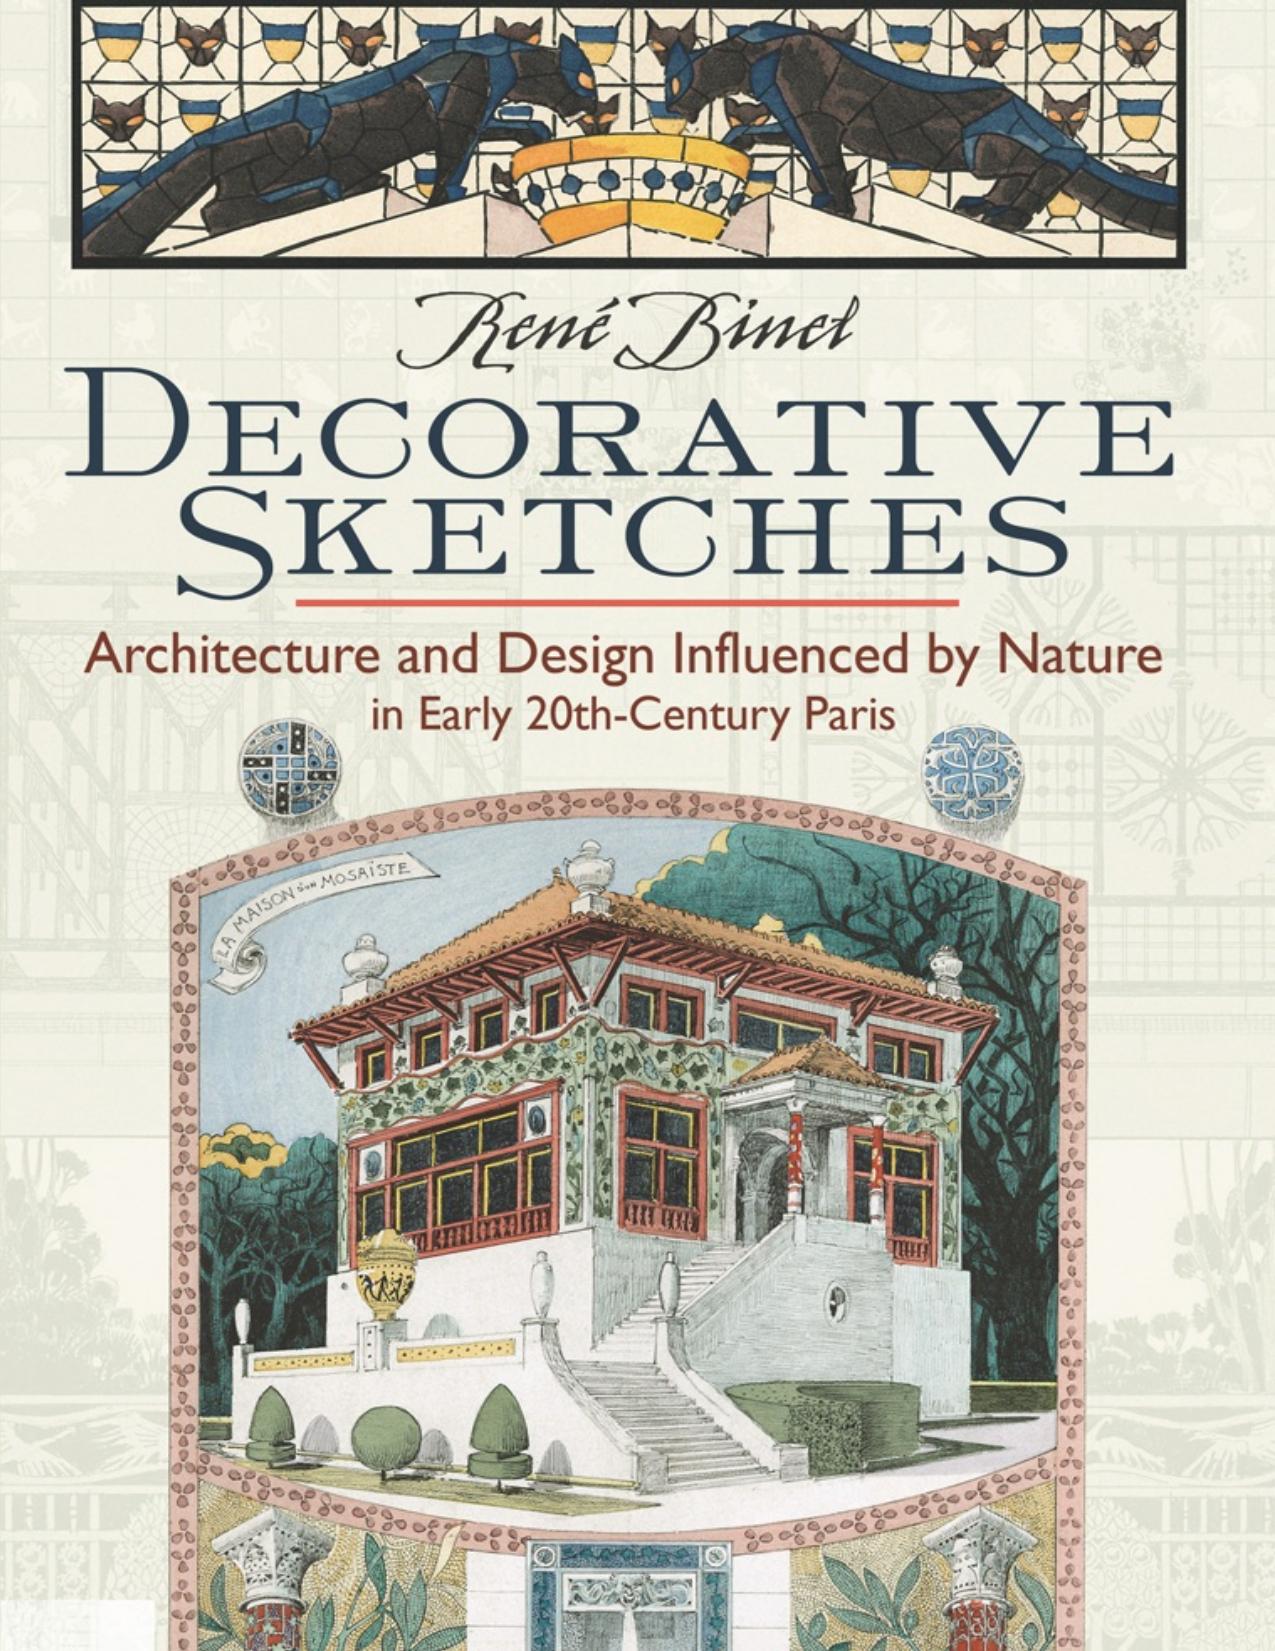 Decorative Sketches: Architecture and Design Influenced by Nature in Early 20th-Century Paris - PDFDrive.com